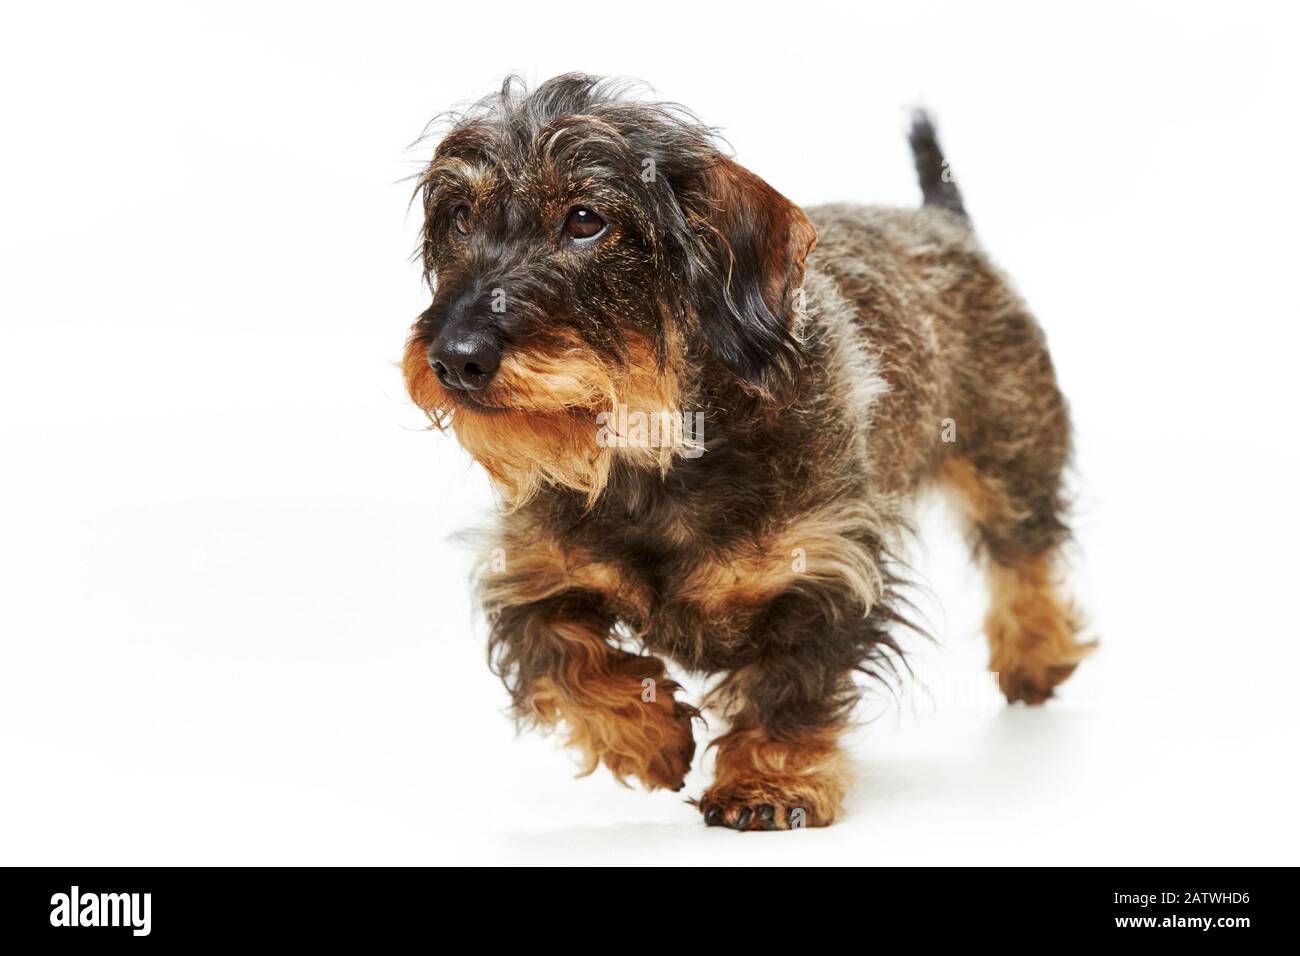 Wire-haired Dachshund. Adult dog walking. Studio picture against a white background. Germany Stock Photo